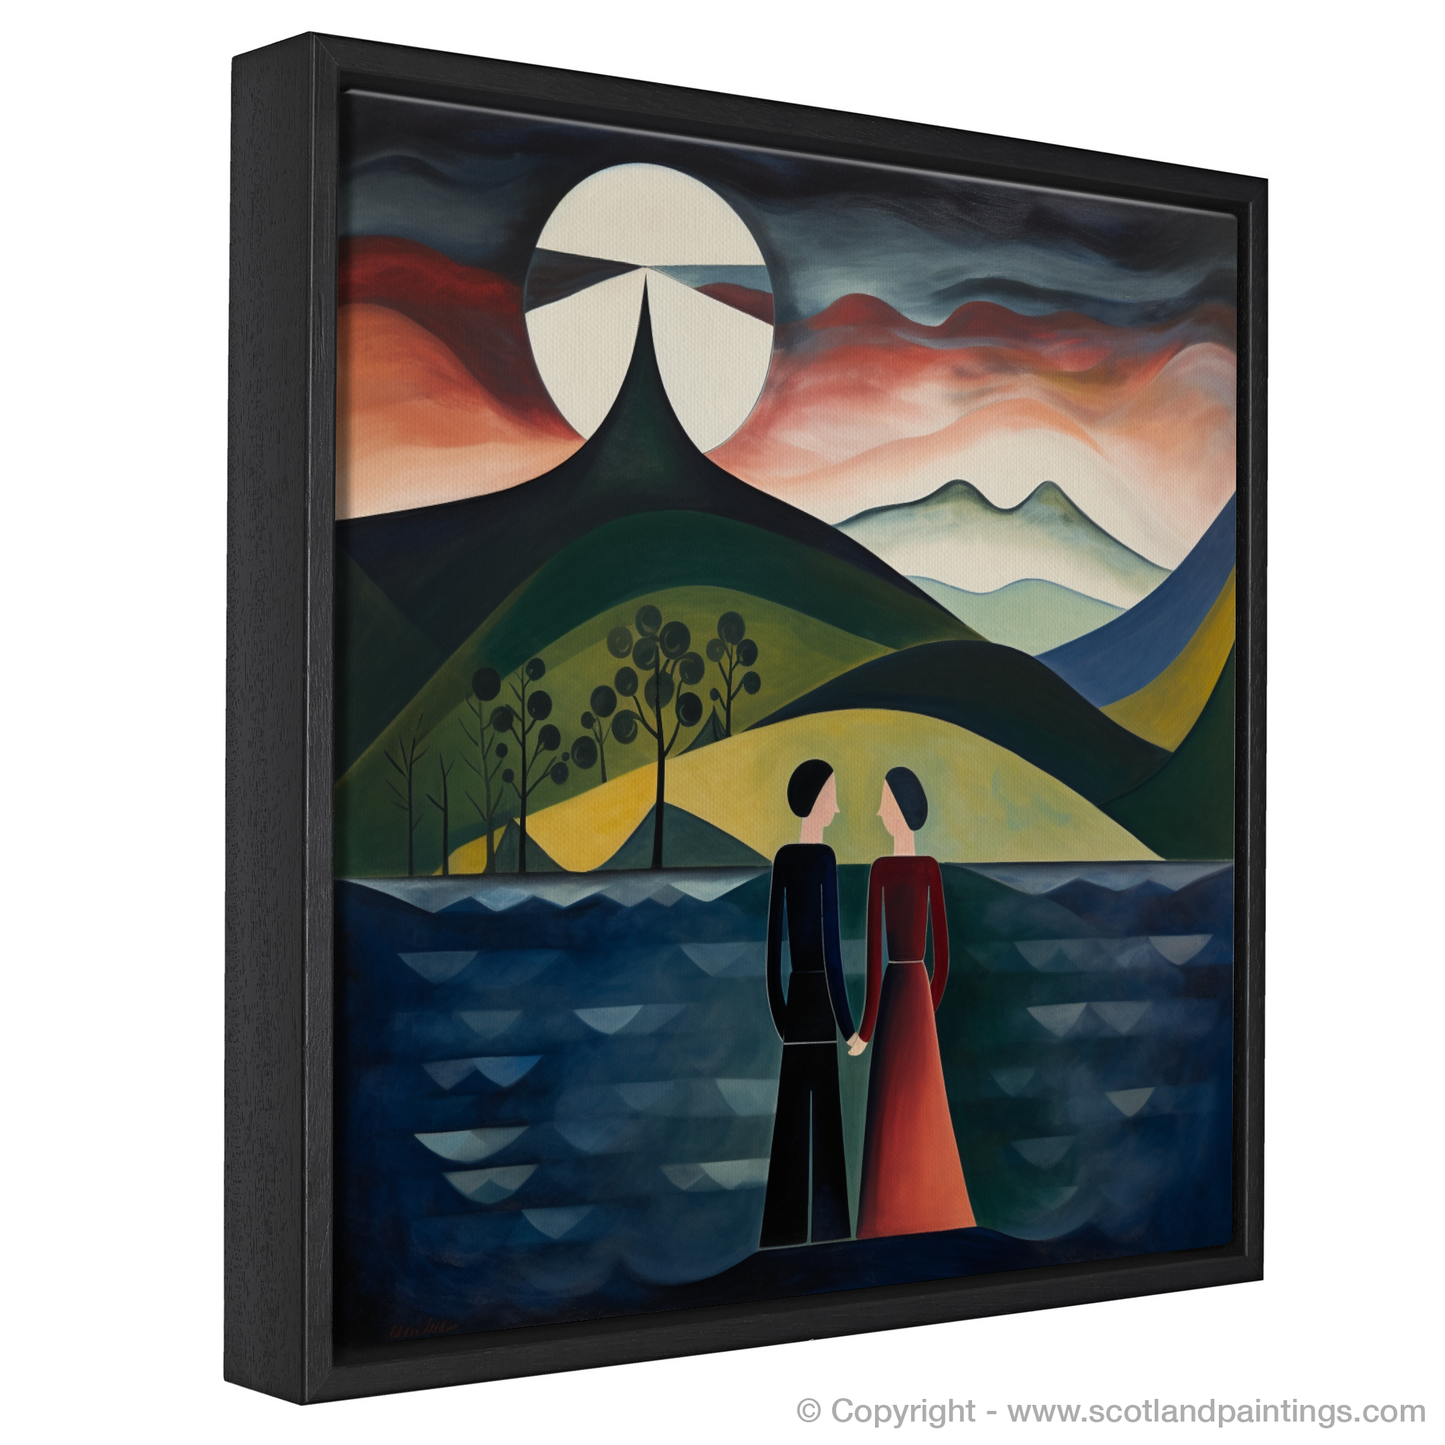 Painting and Art Print of A couple holding hands looking out on Loch Lomond entitled "Embracing Tranquility at Loch Lomond".